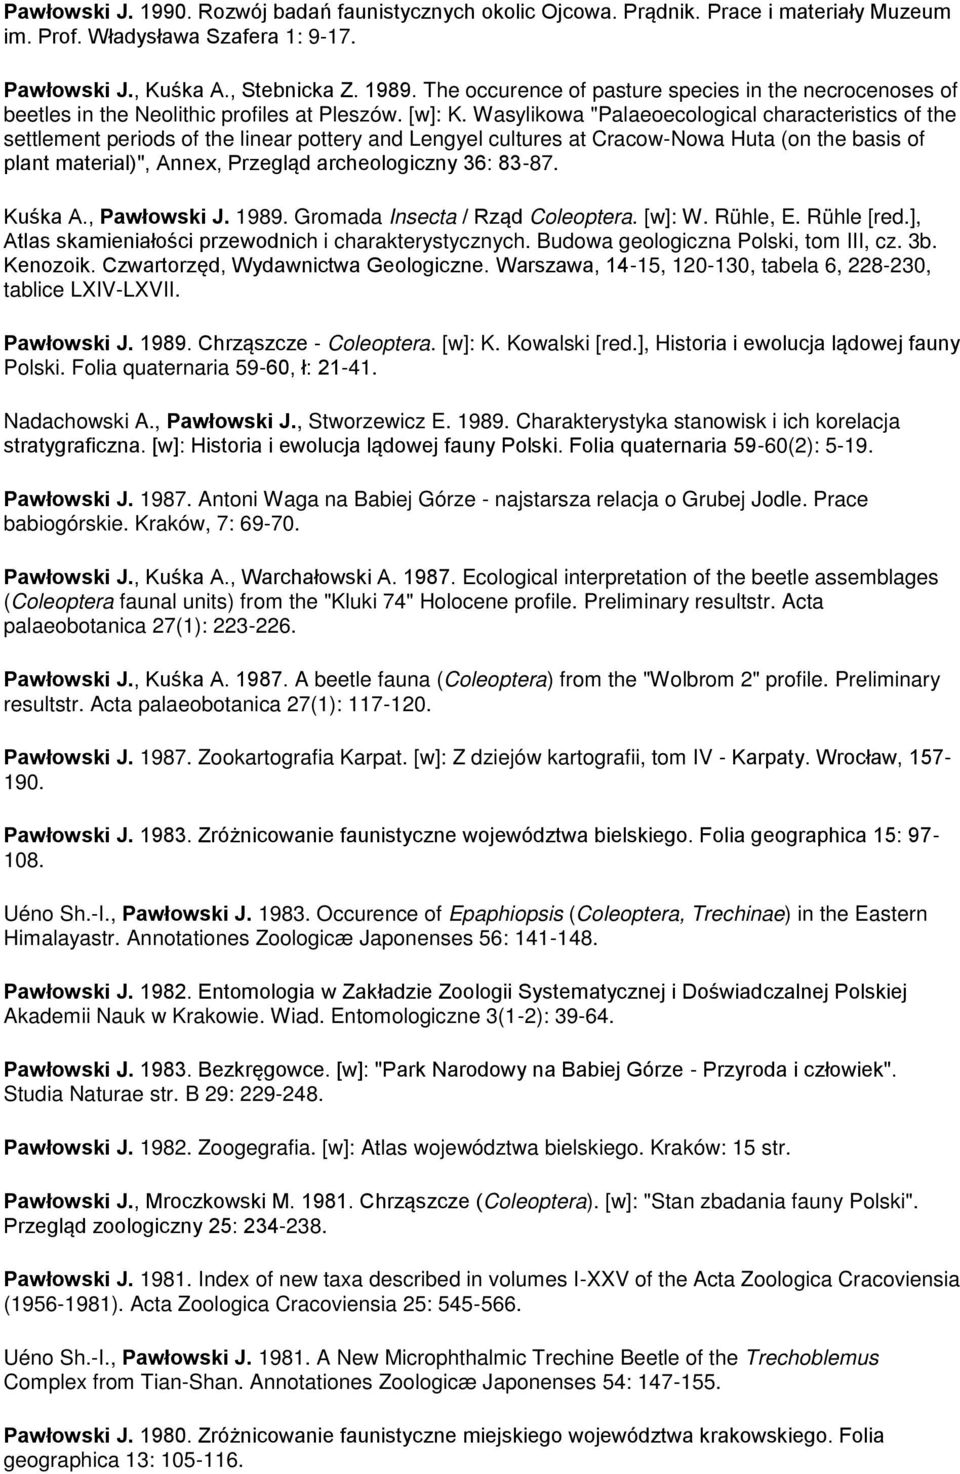 Wasylikowa "Palaeoecological characteristics of the settlement periods of the linear pottery and Lengyel cultures at Cracow-Nowa Huta (on the basis of plant material)", Annex, Przegląd archeologiczny